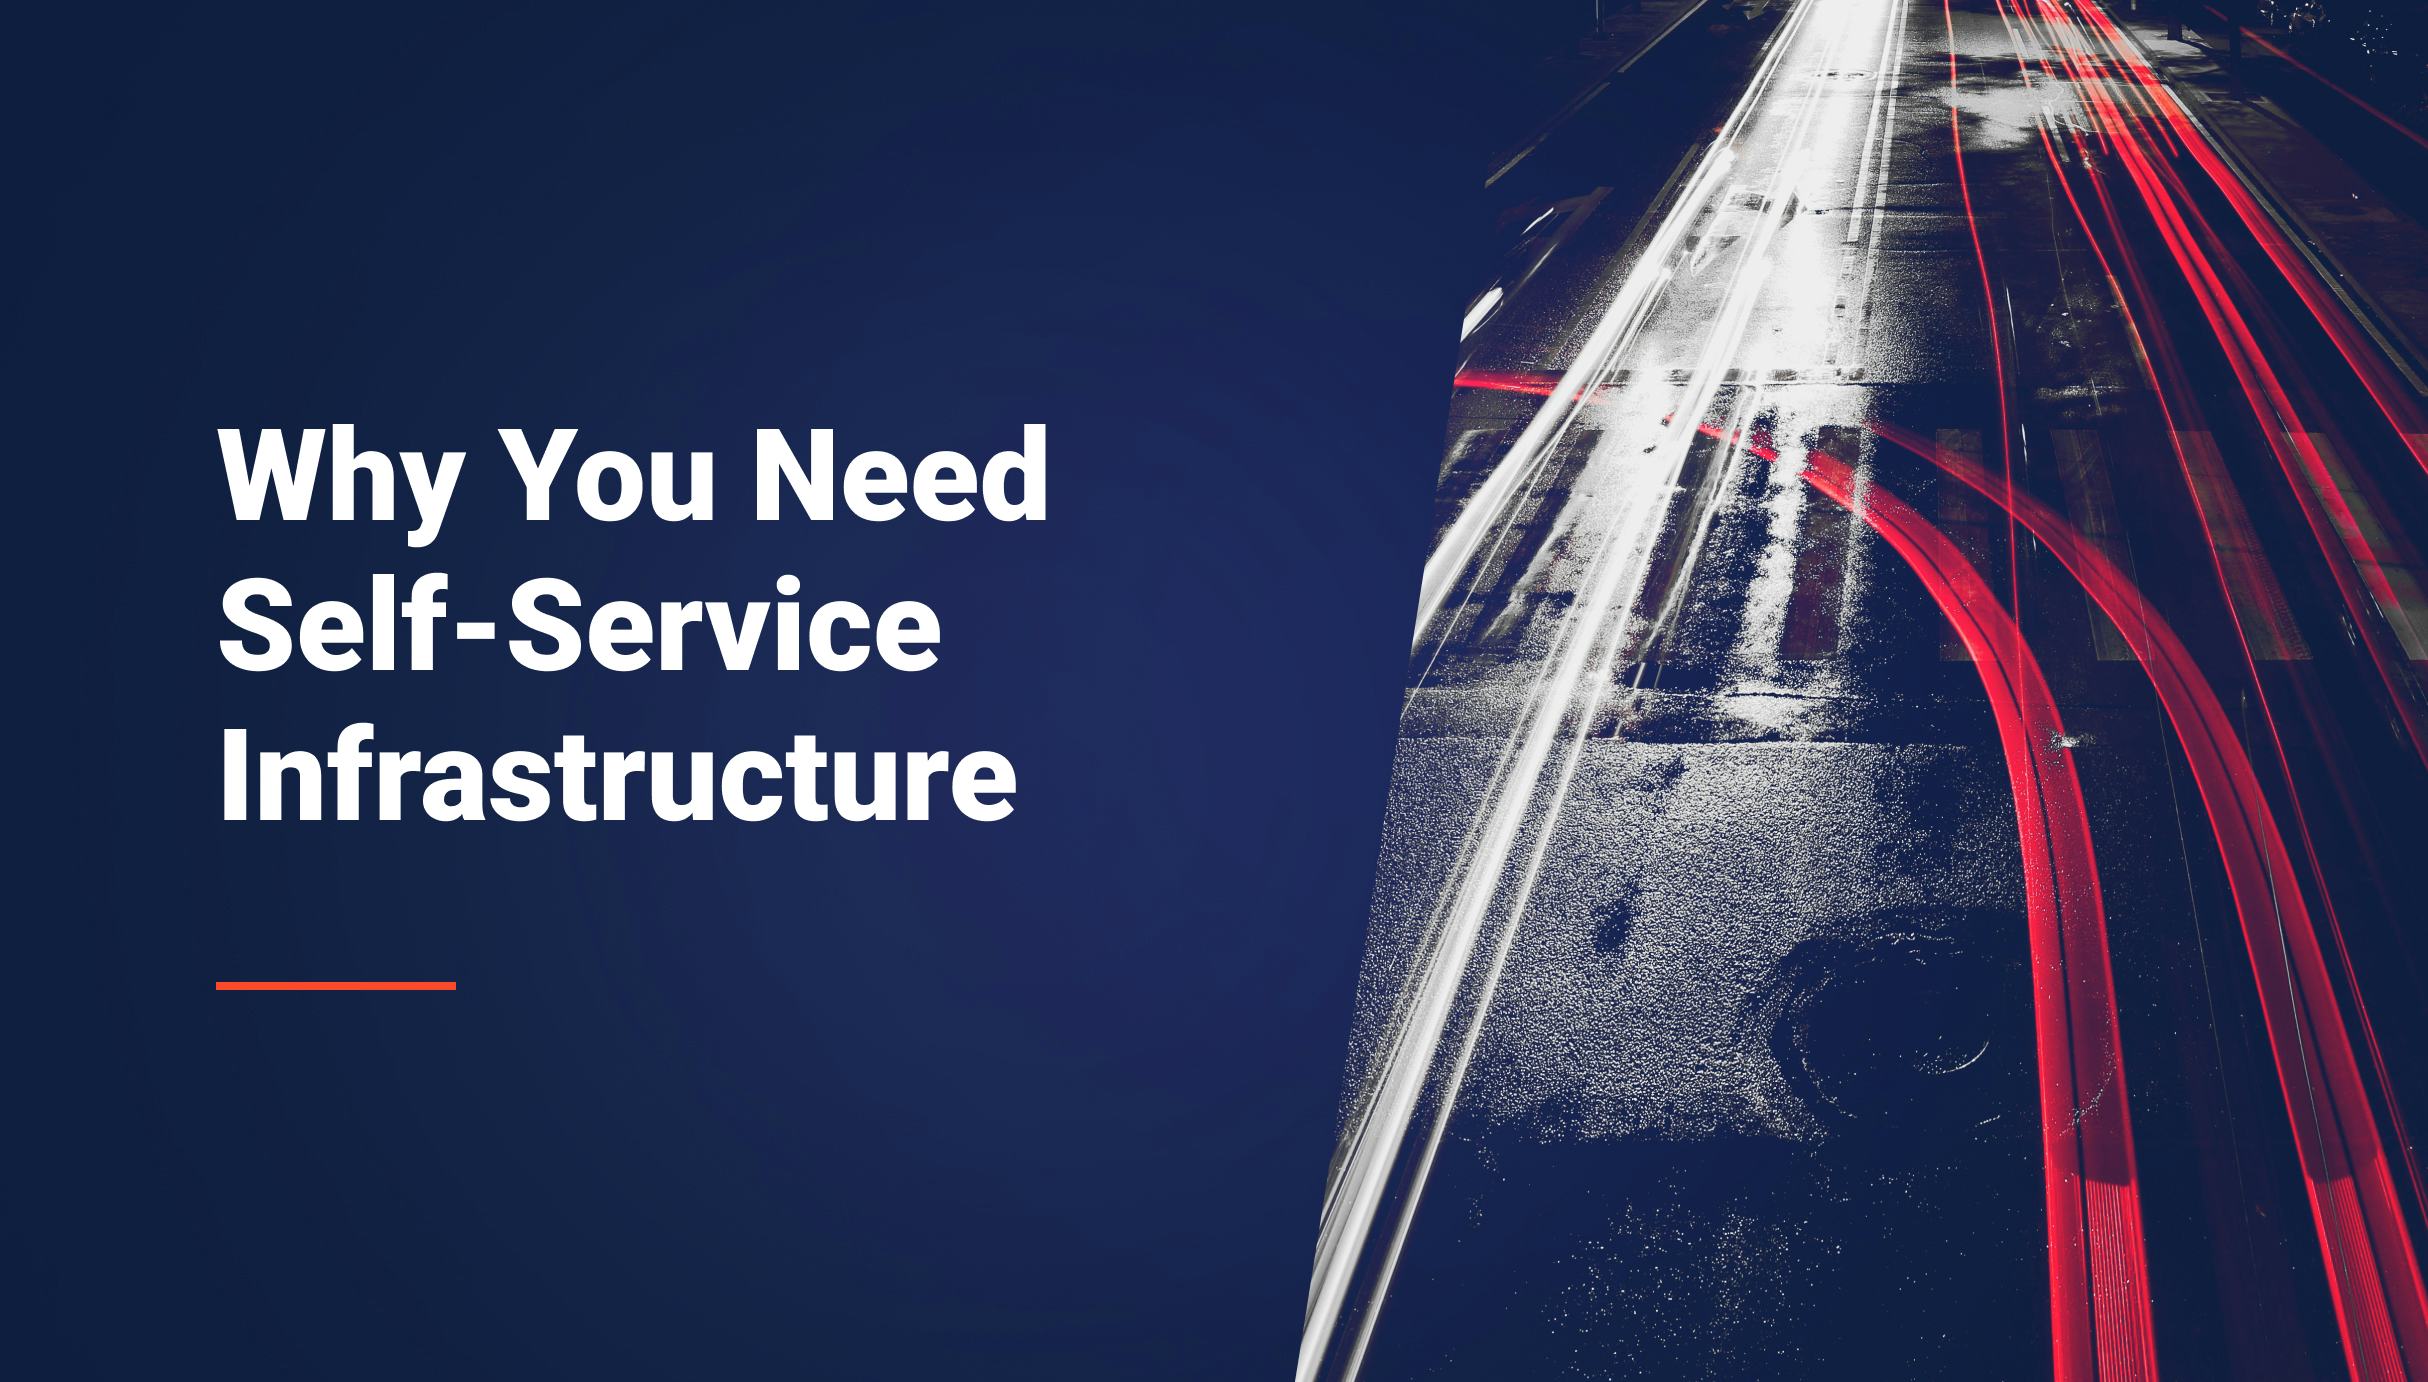 Why You Need Self-Service Infrastructure